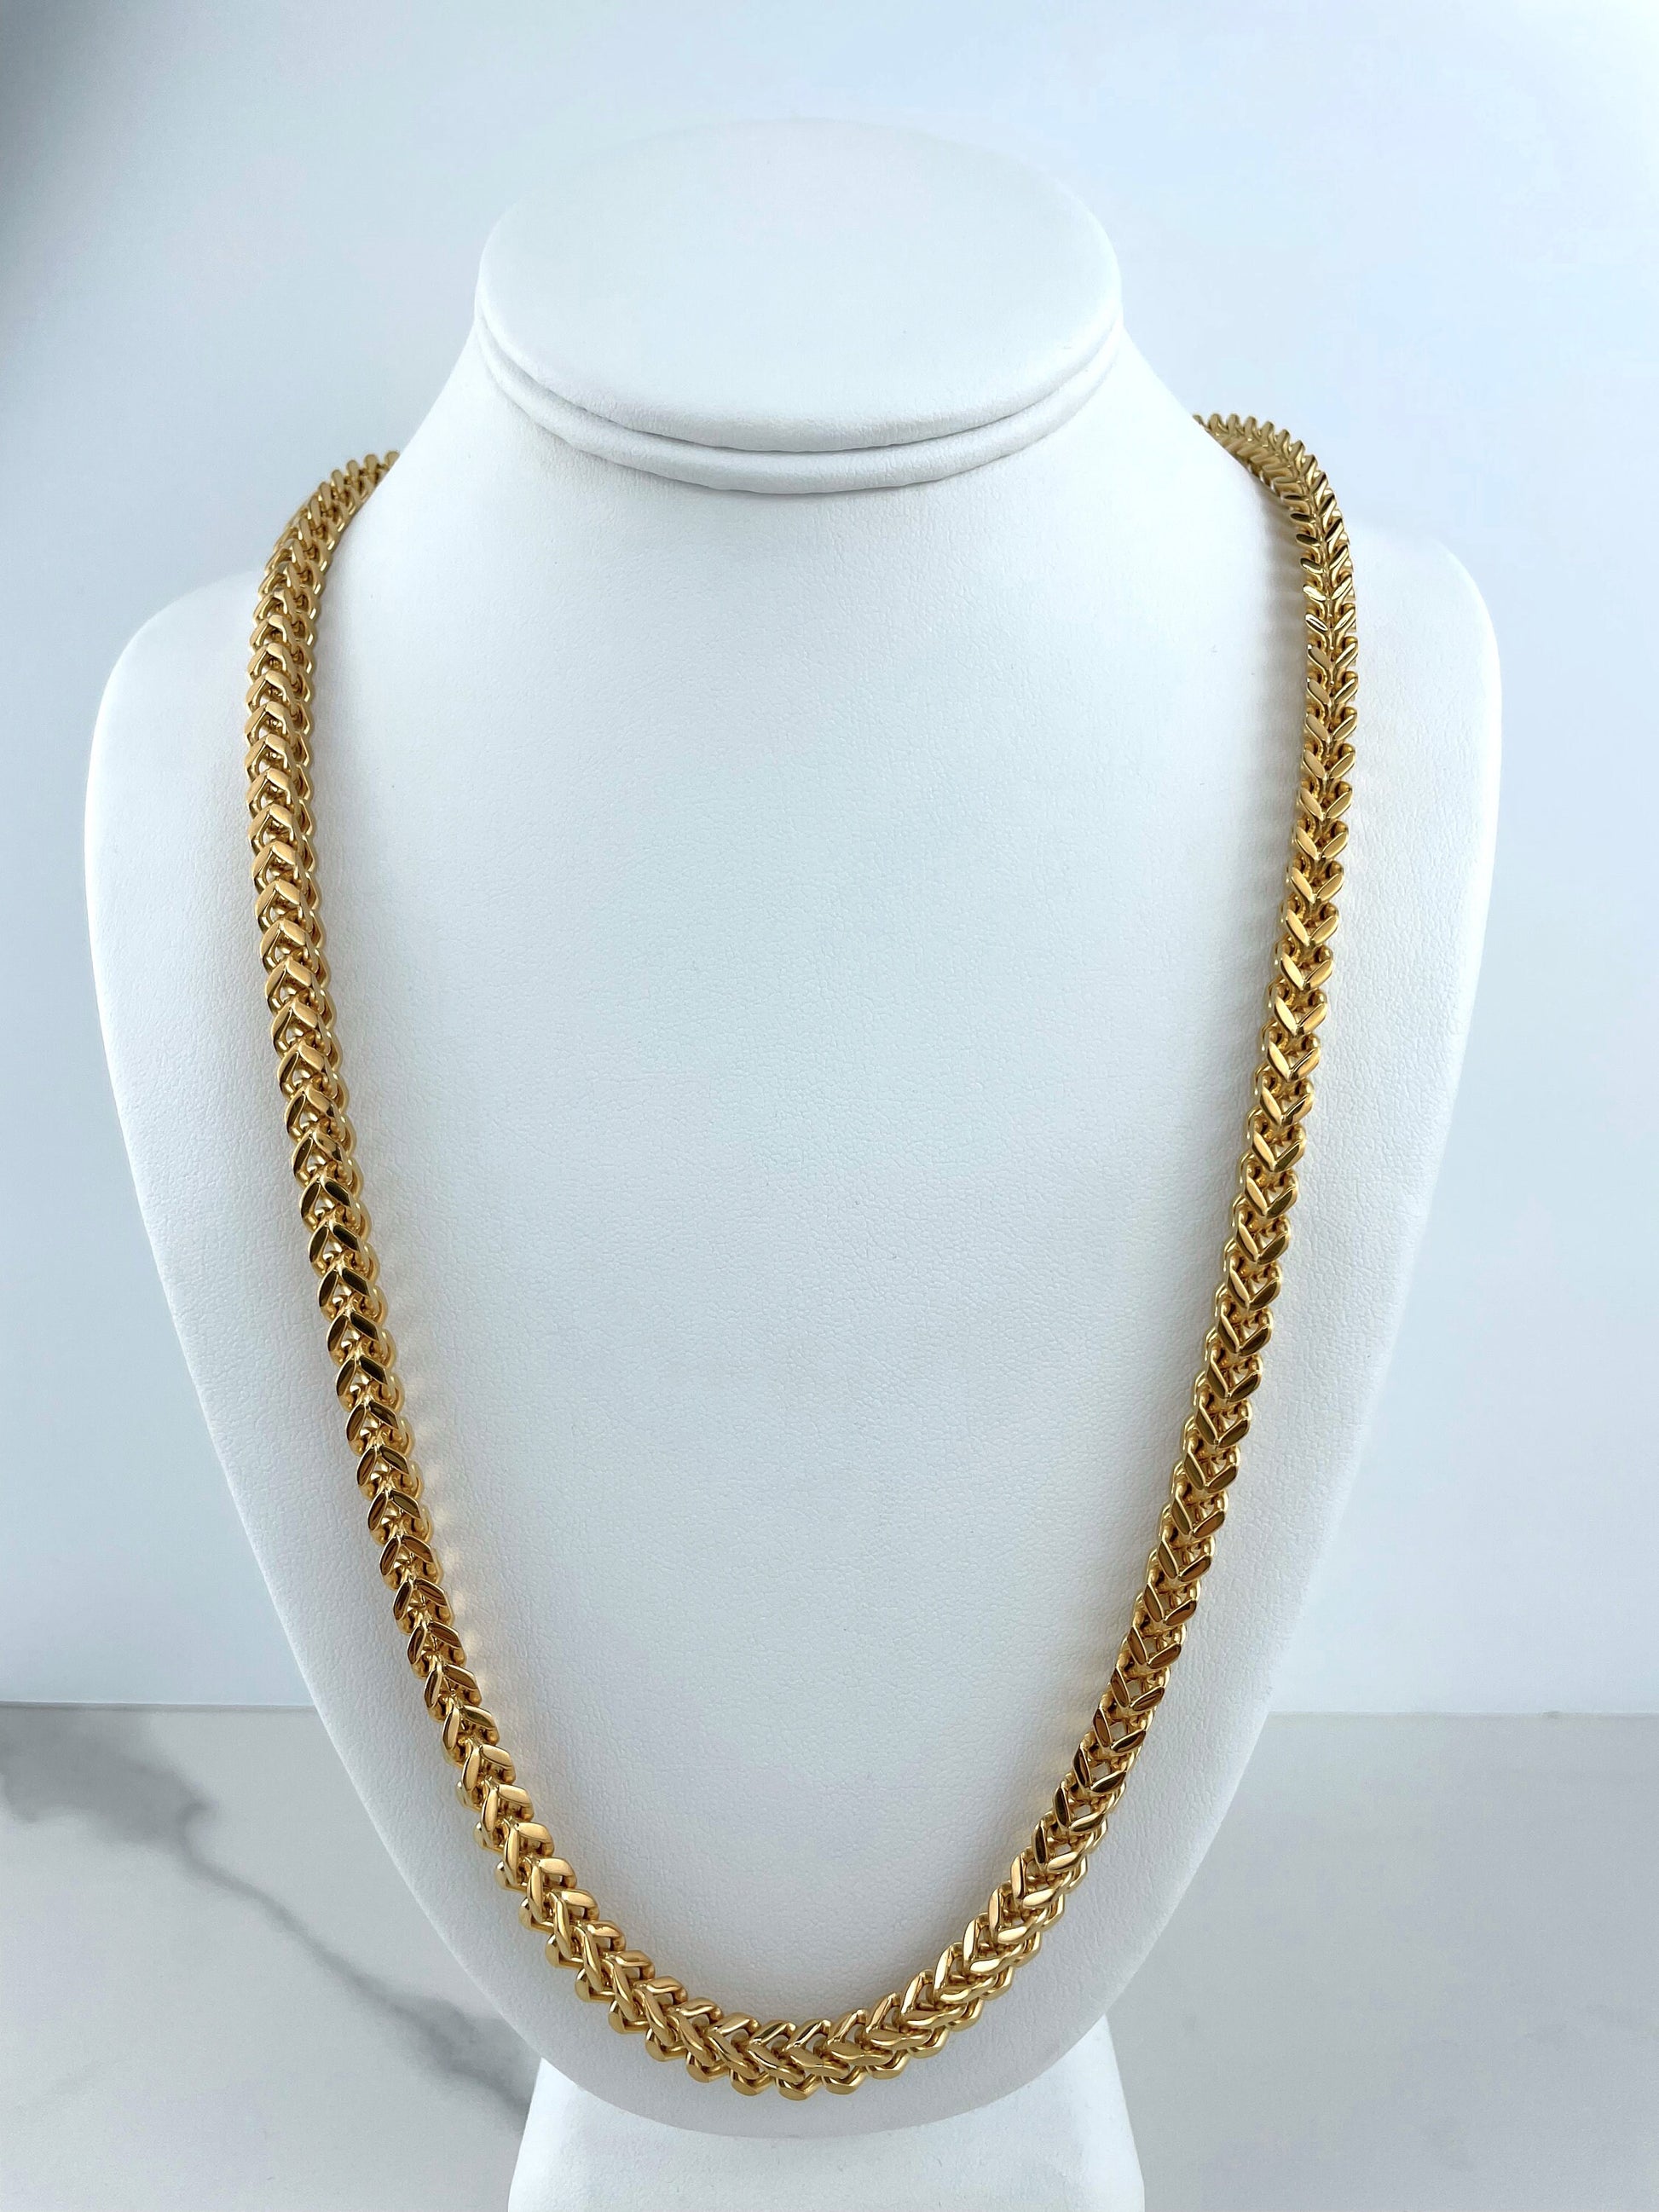 Gold Plated On Stainless Steel 6mm Box Chain, Lobster Claw, Men's Jewelry, Hip Hop, Wholesale Jewelry Making Supplies